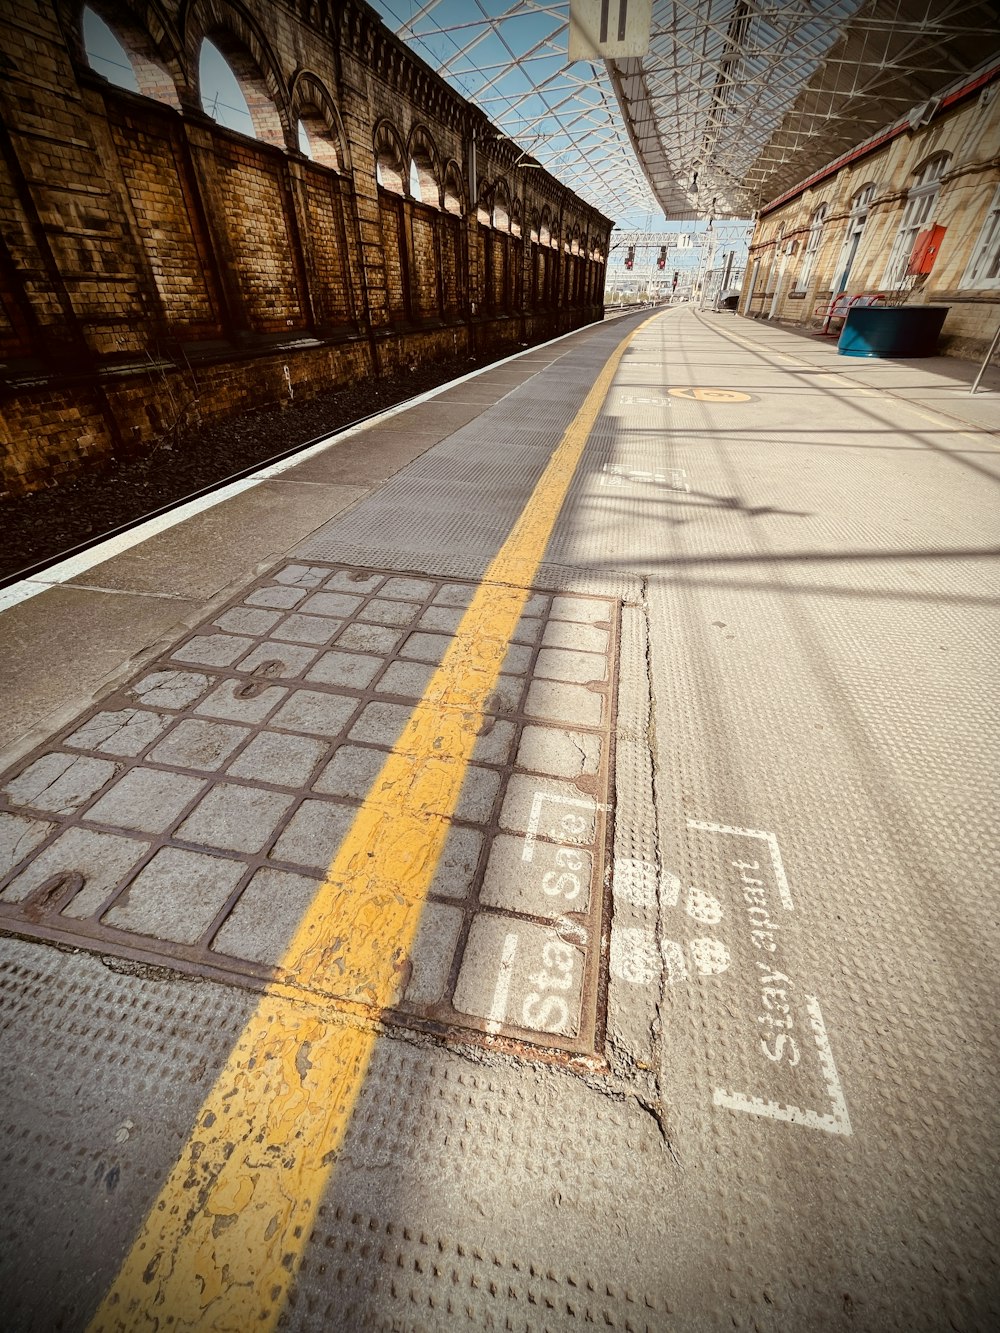 a train station with a yellow line painted on the ground